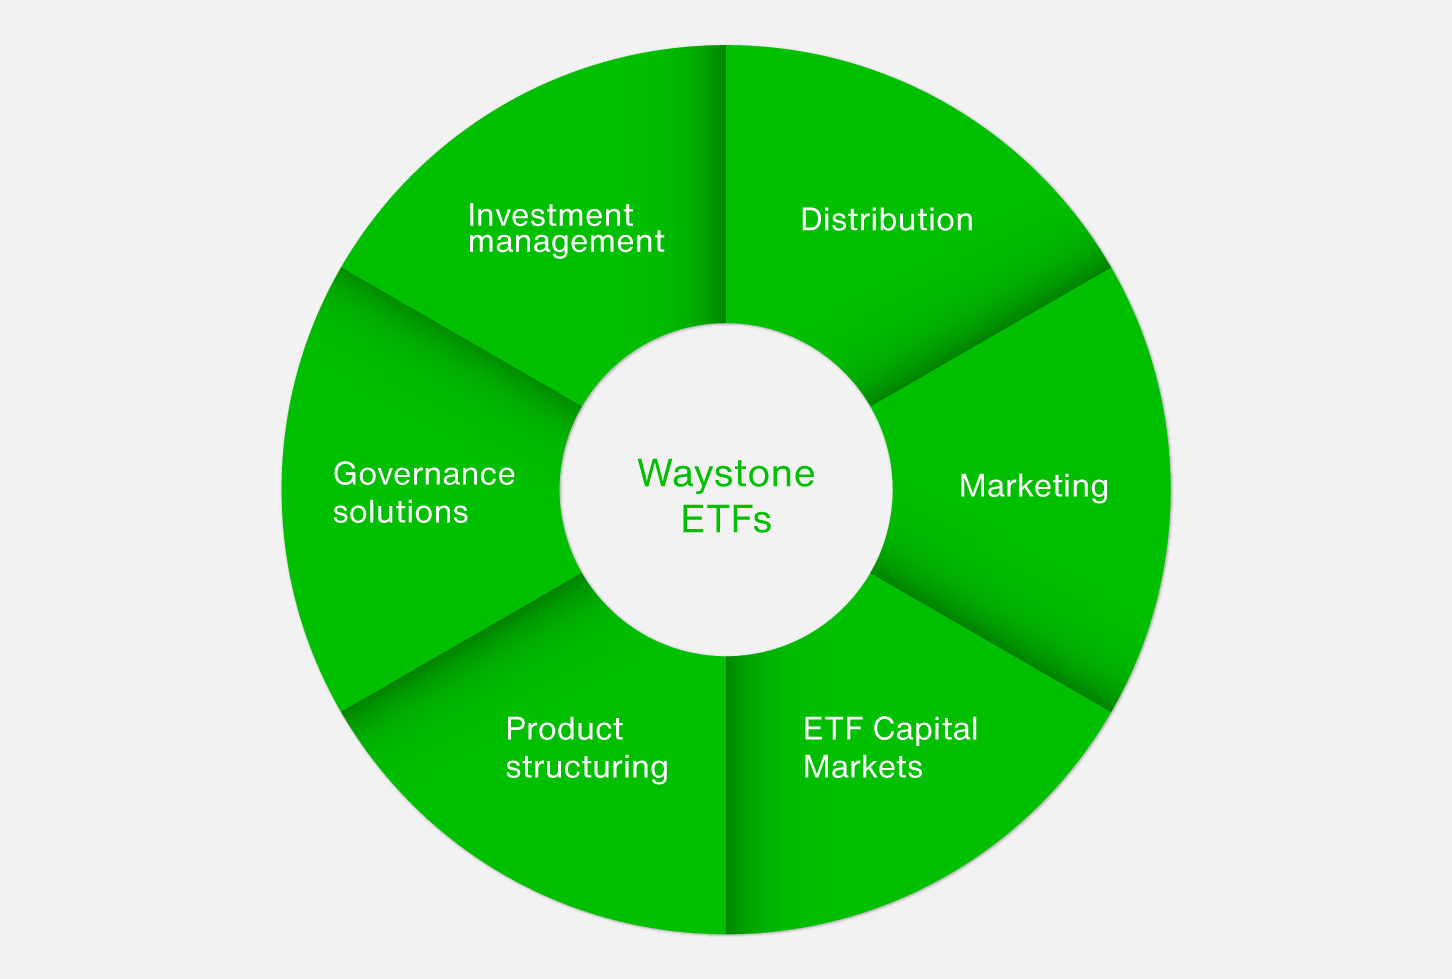 Waystone’s Core ETF Solutions